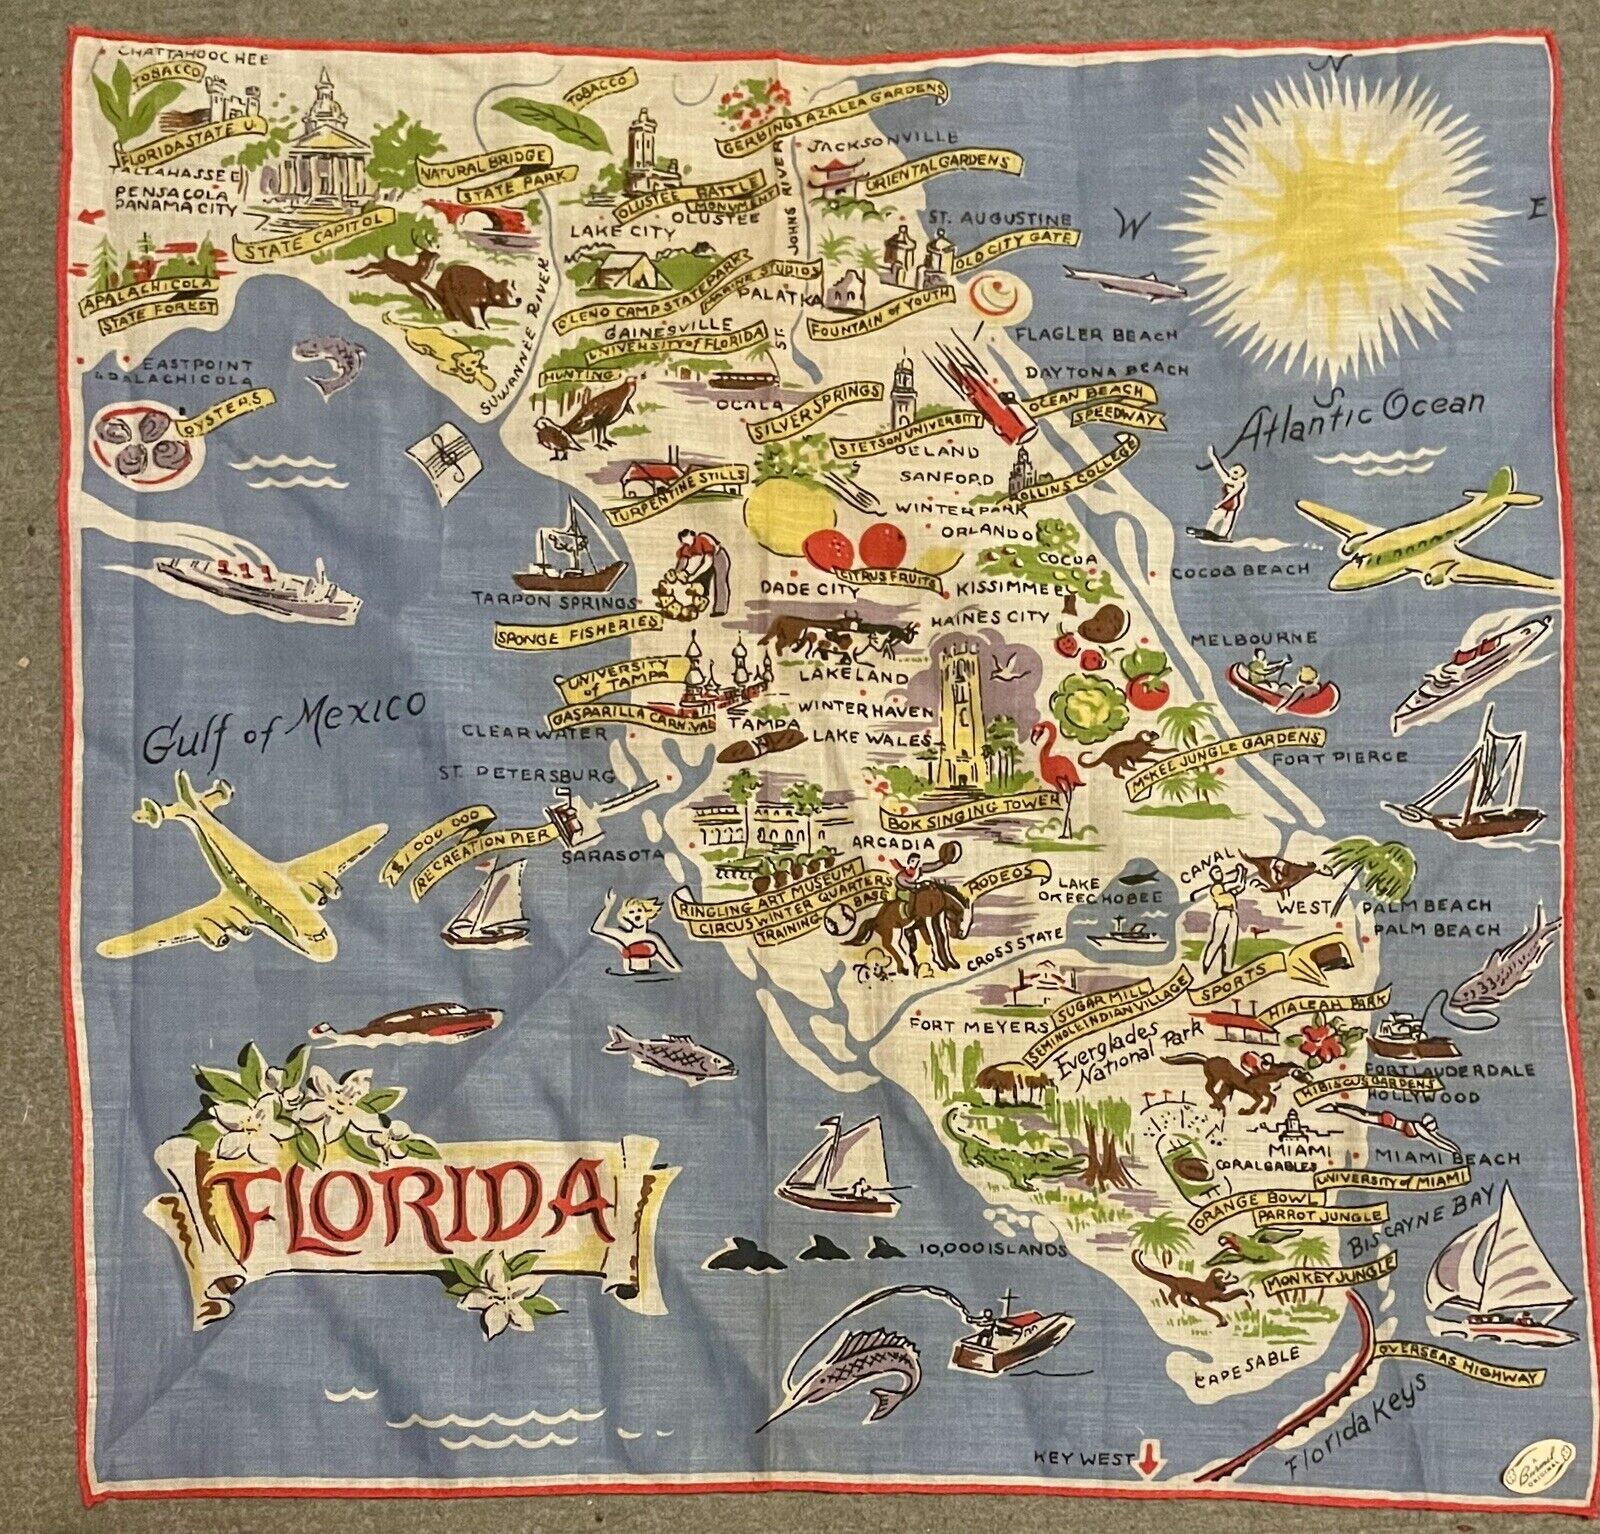 1950s Florida Souvenir Hanky With Map & Great Graphics - Classic FL Kitsch